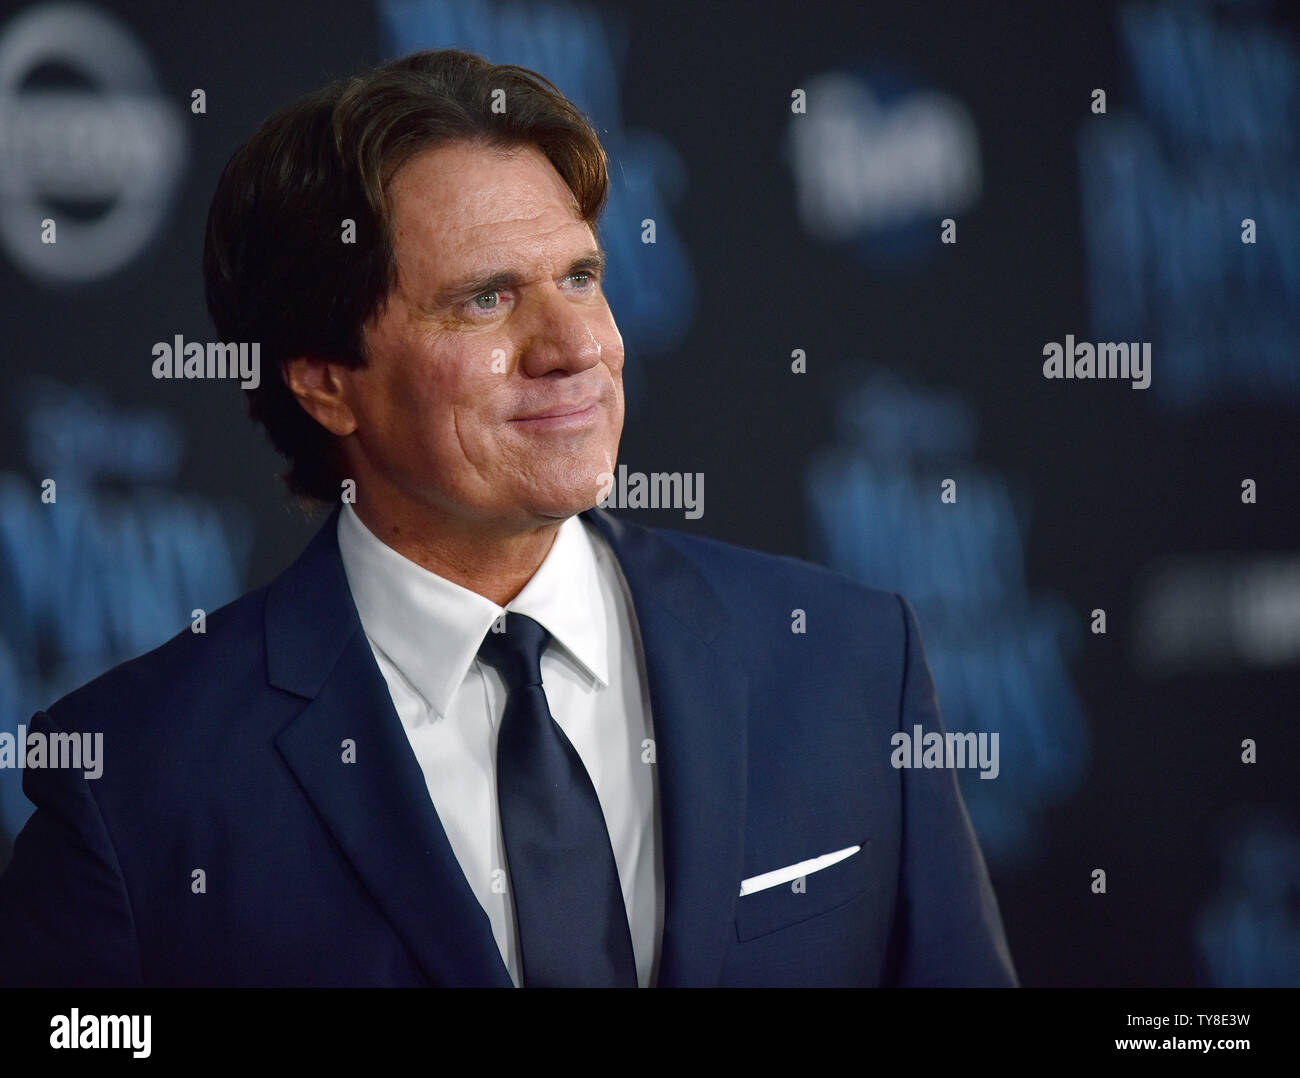 Director/producer Rob Marshall attends the world premiere of 'Mary Poppins Returns' at the Dolby Theatre in Los Angeles, California on November 29, 2018. Photo by Chris Chew/UPI Stock Photo